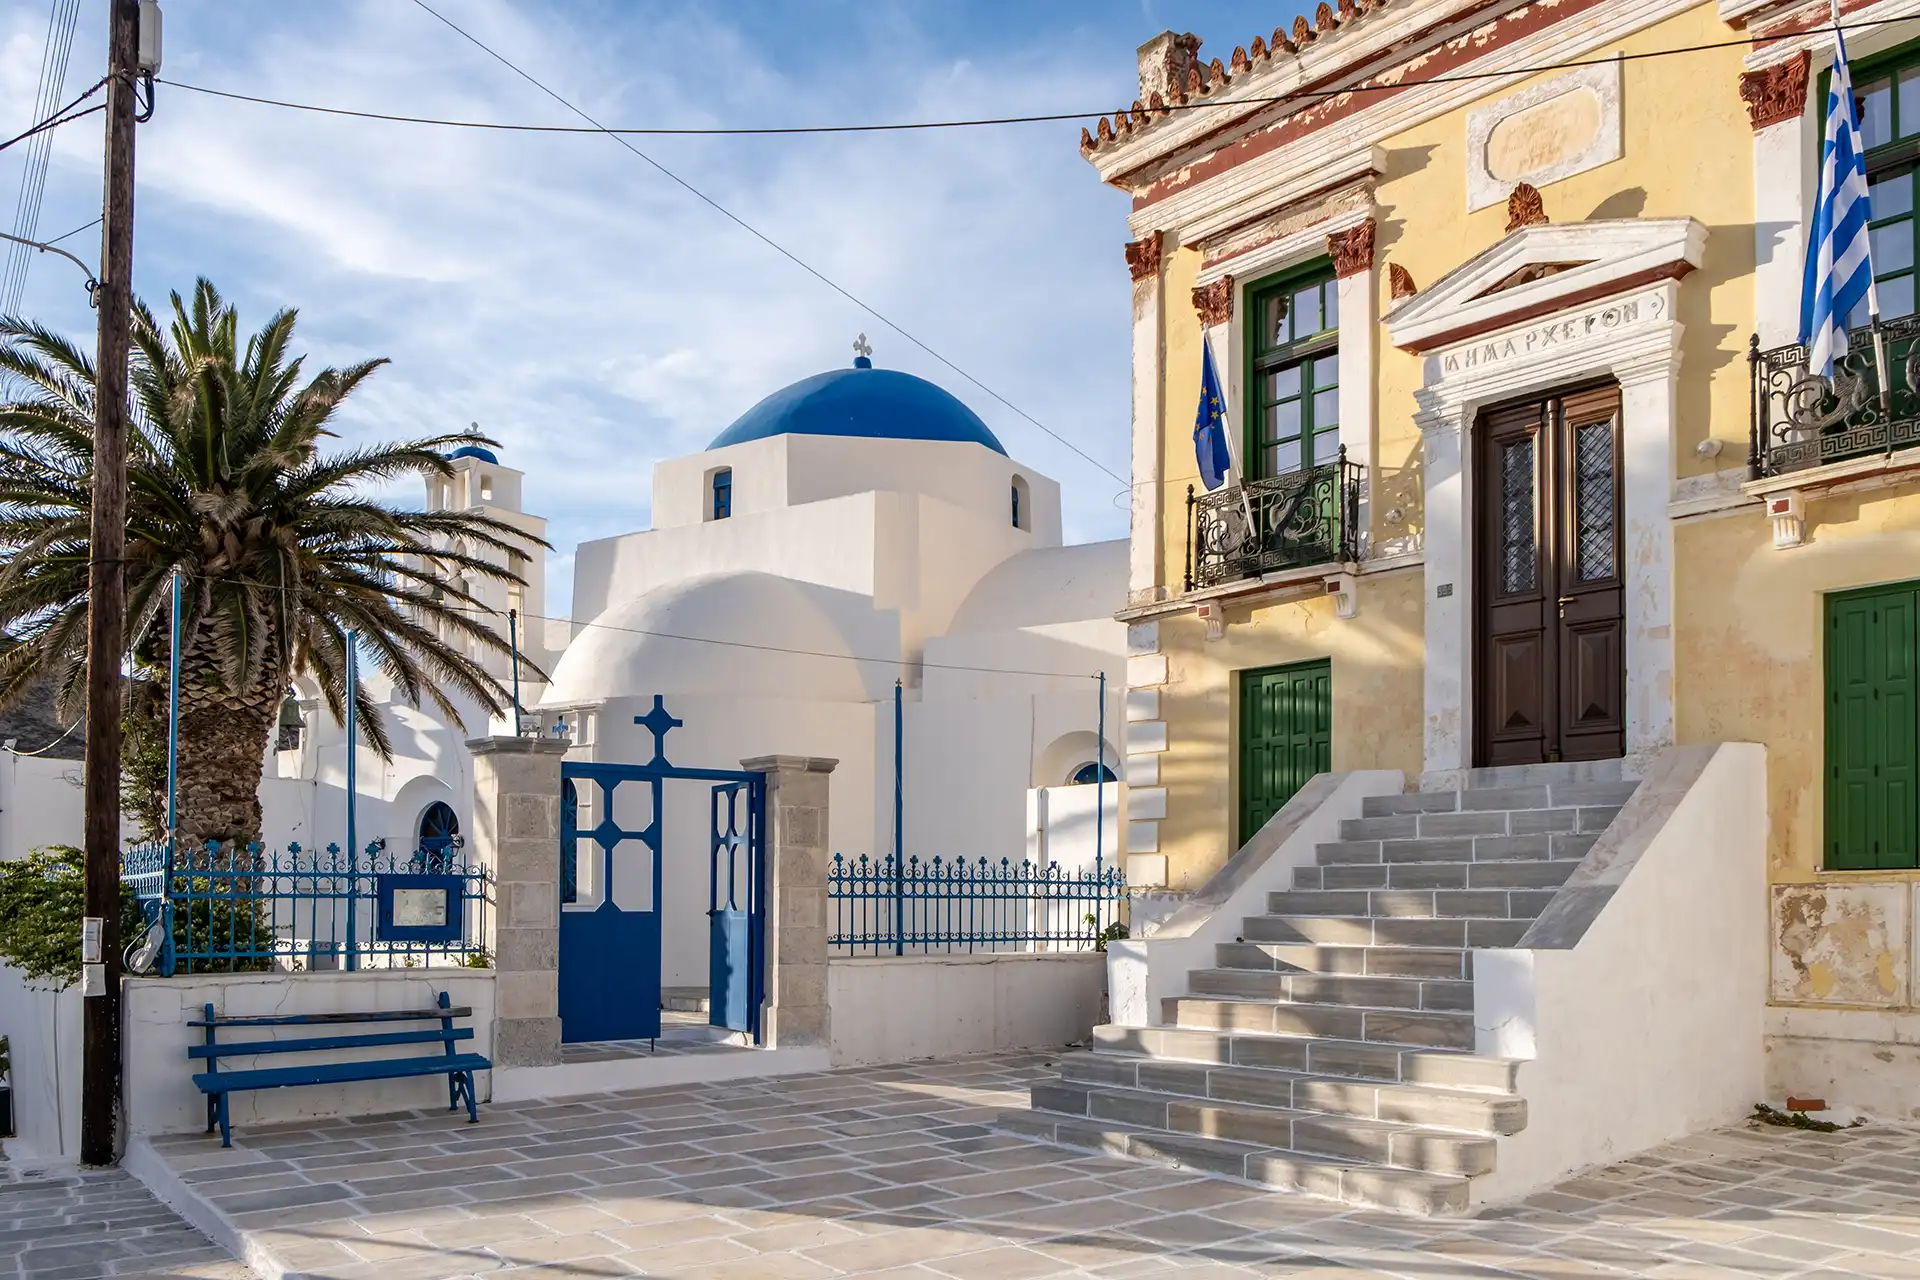 Serifos island, Chora, Cyclades Greece. Town hall and church background